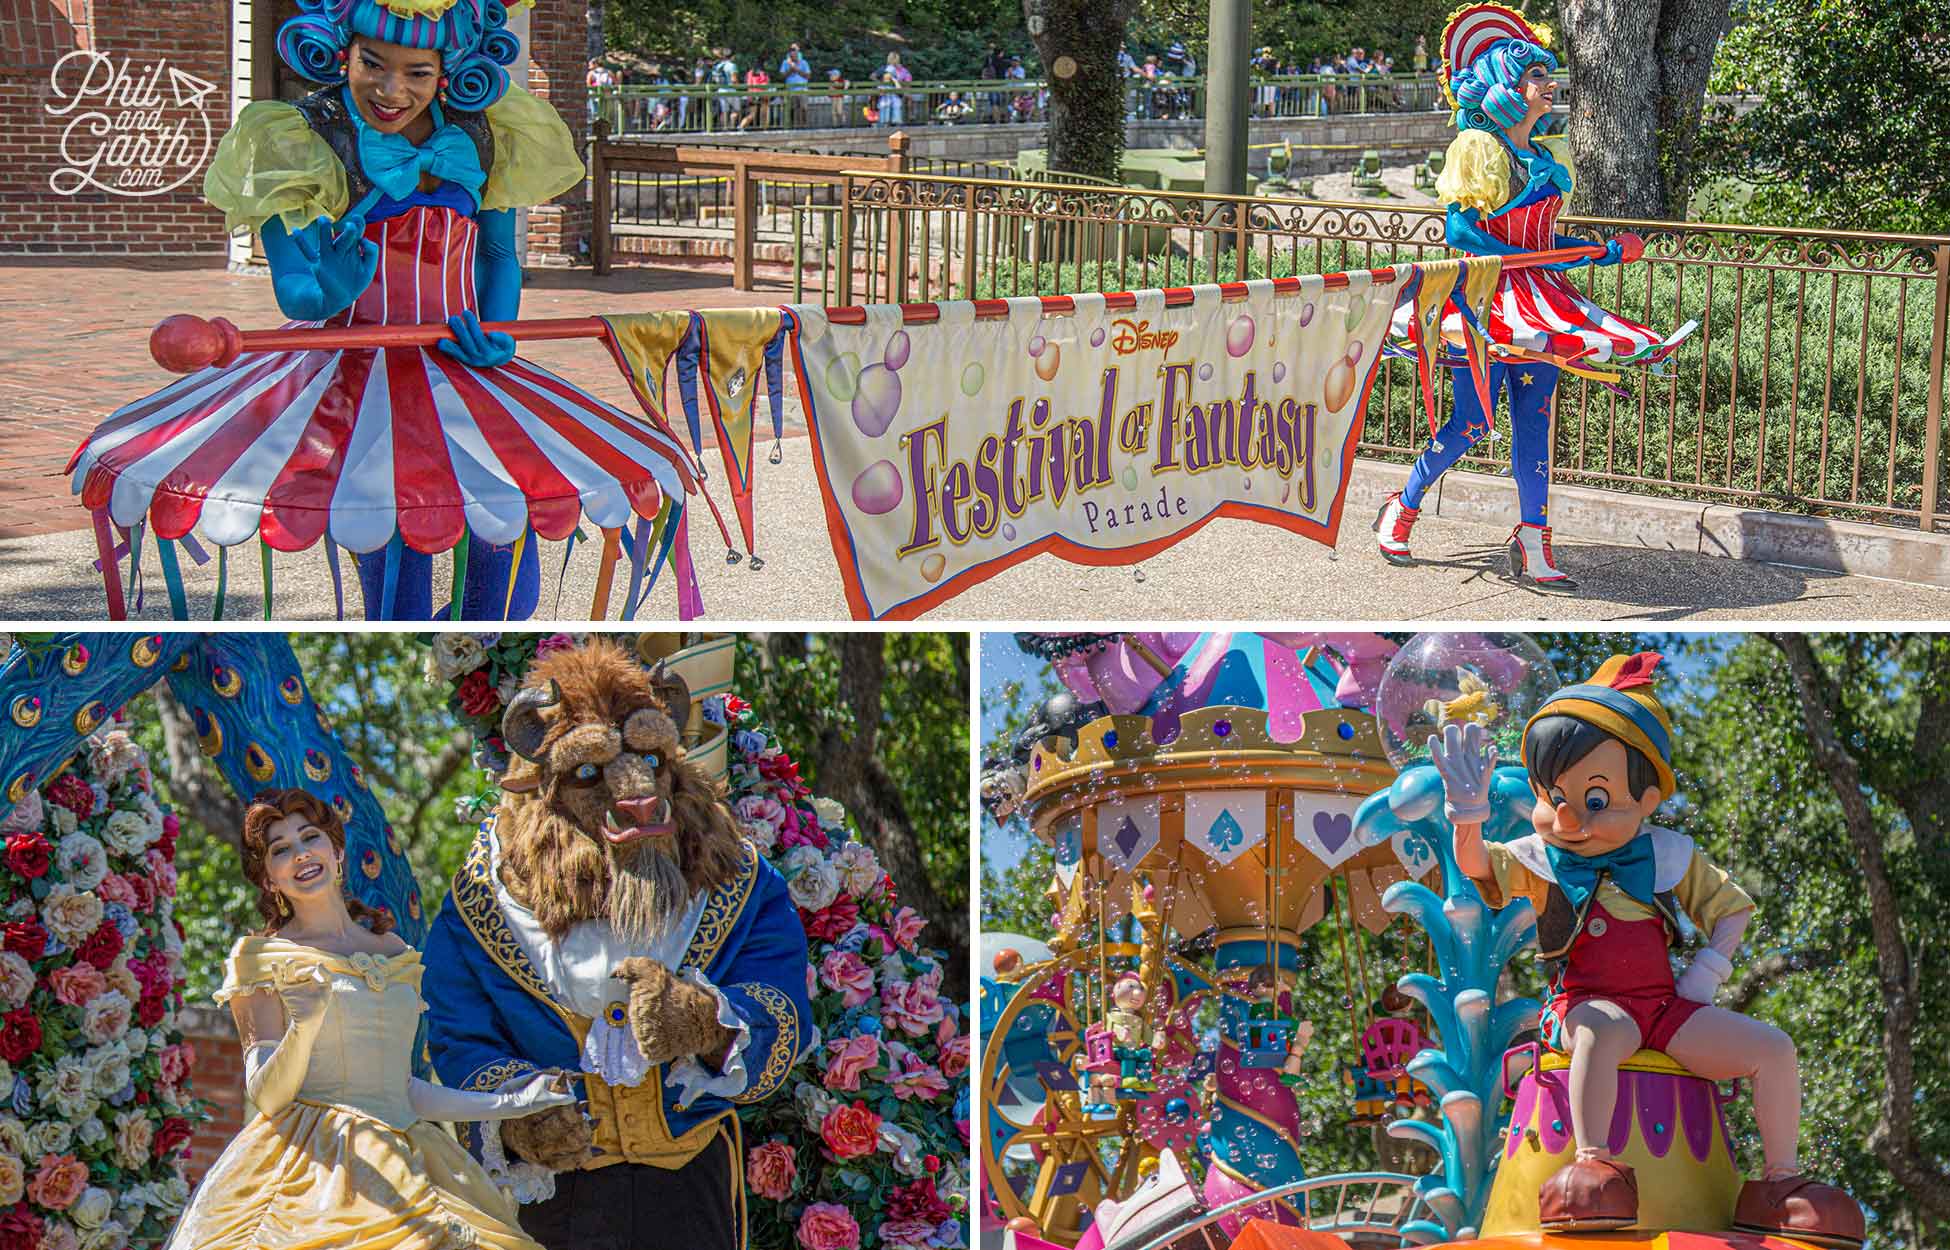 The Festival of Fantasy afternoon parade